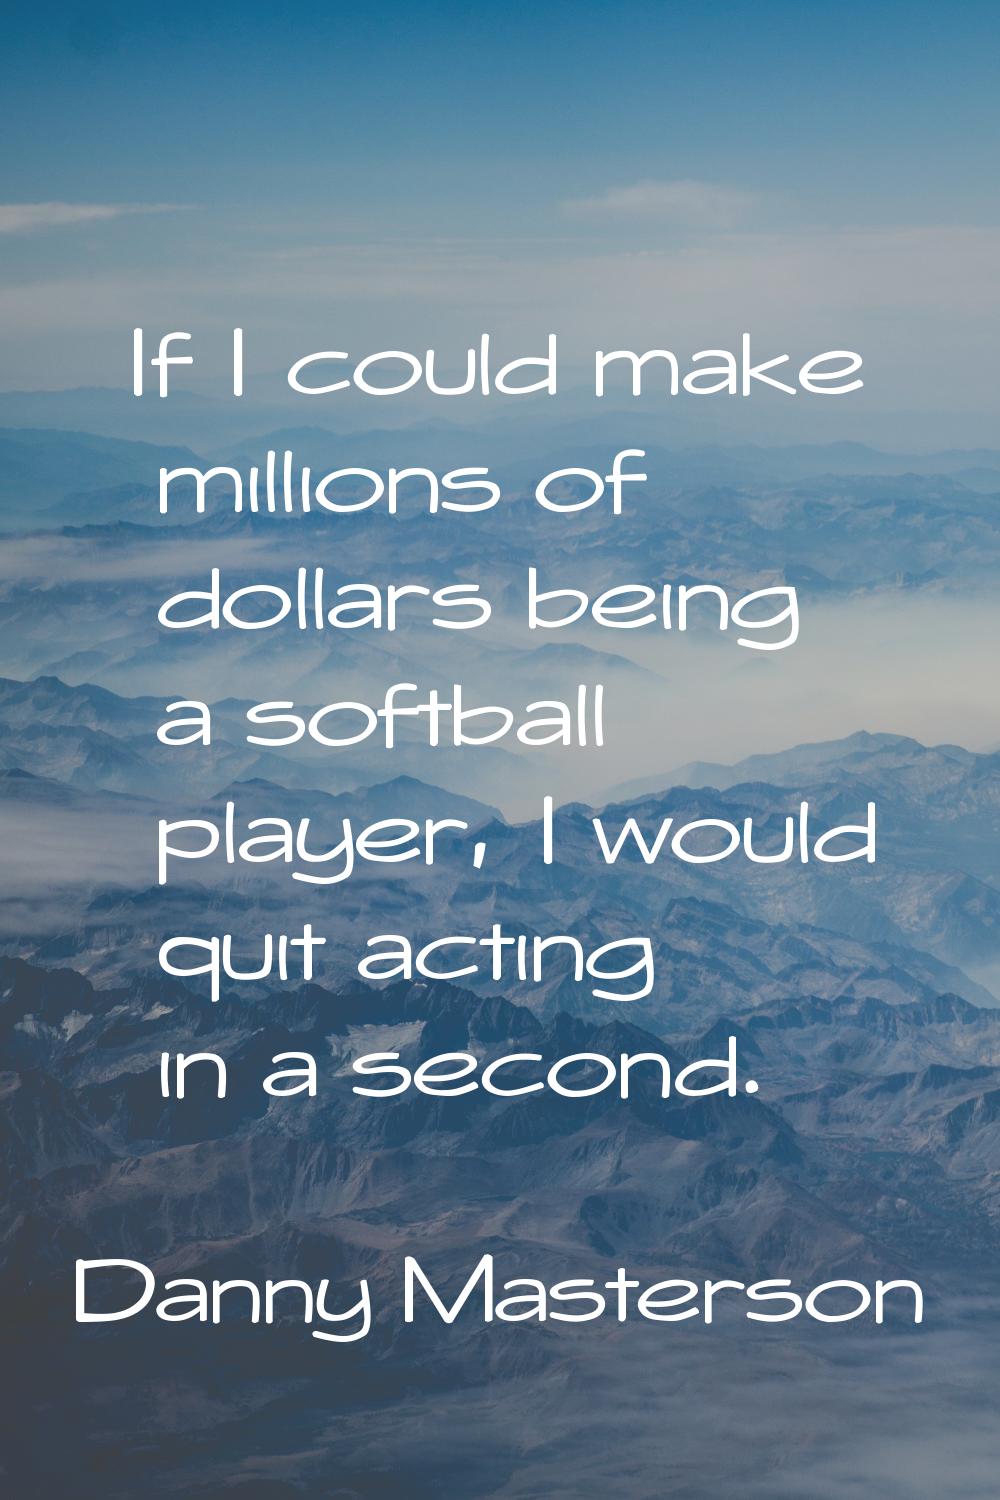 If I could make millions of dollars being a softball player, I would quit acting in a second.